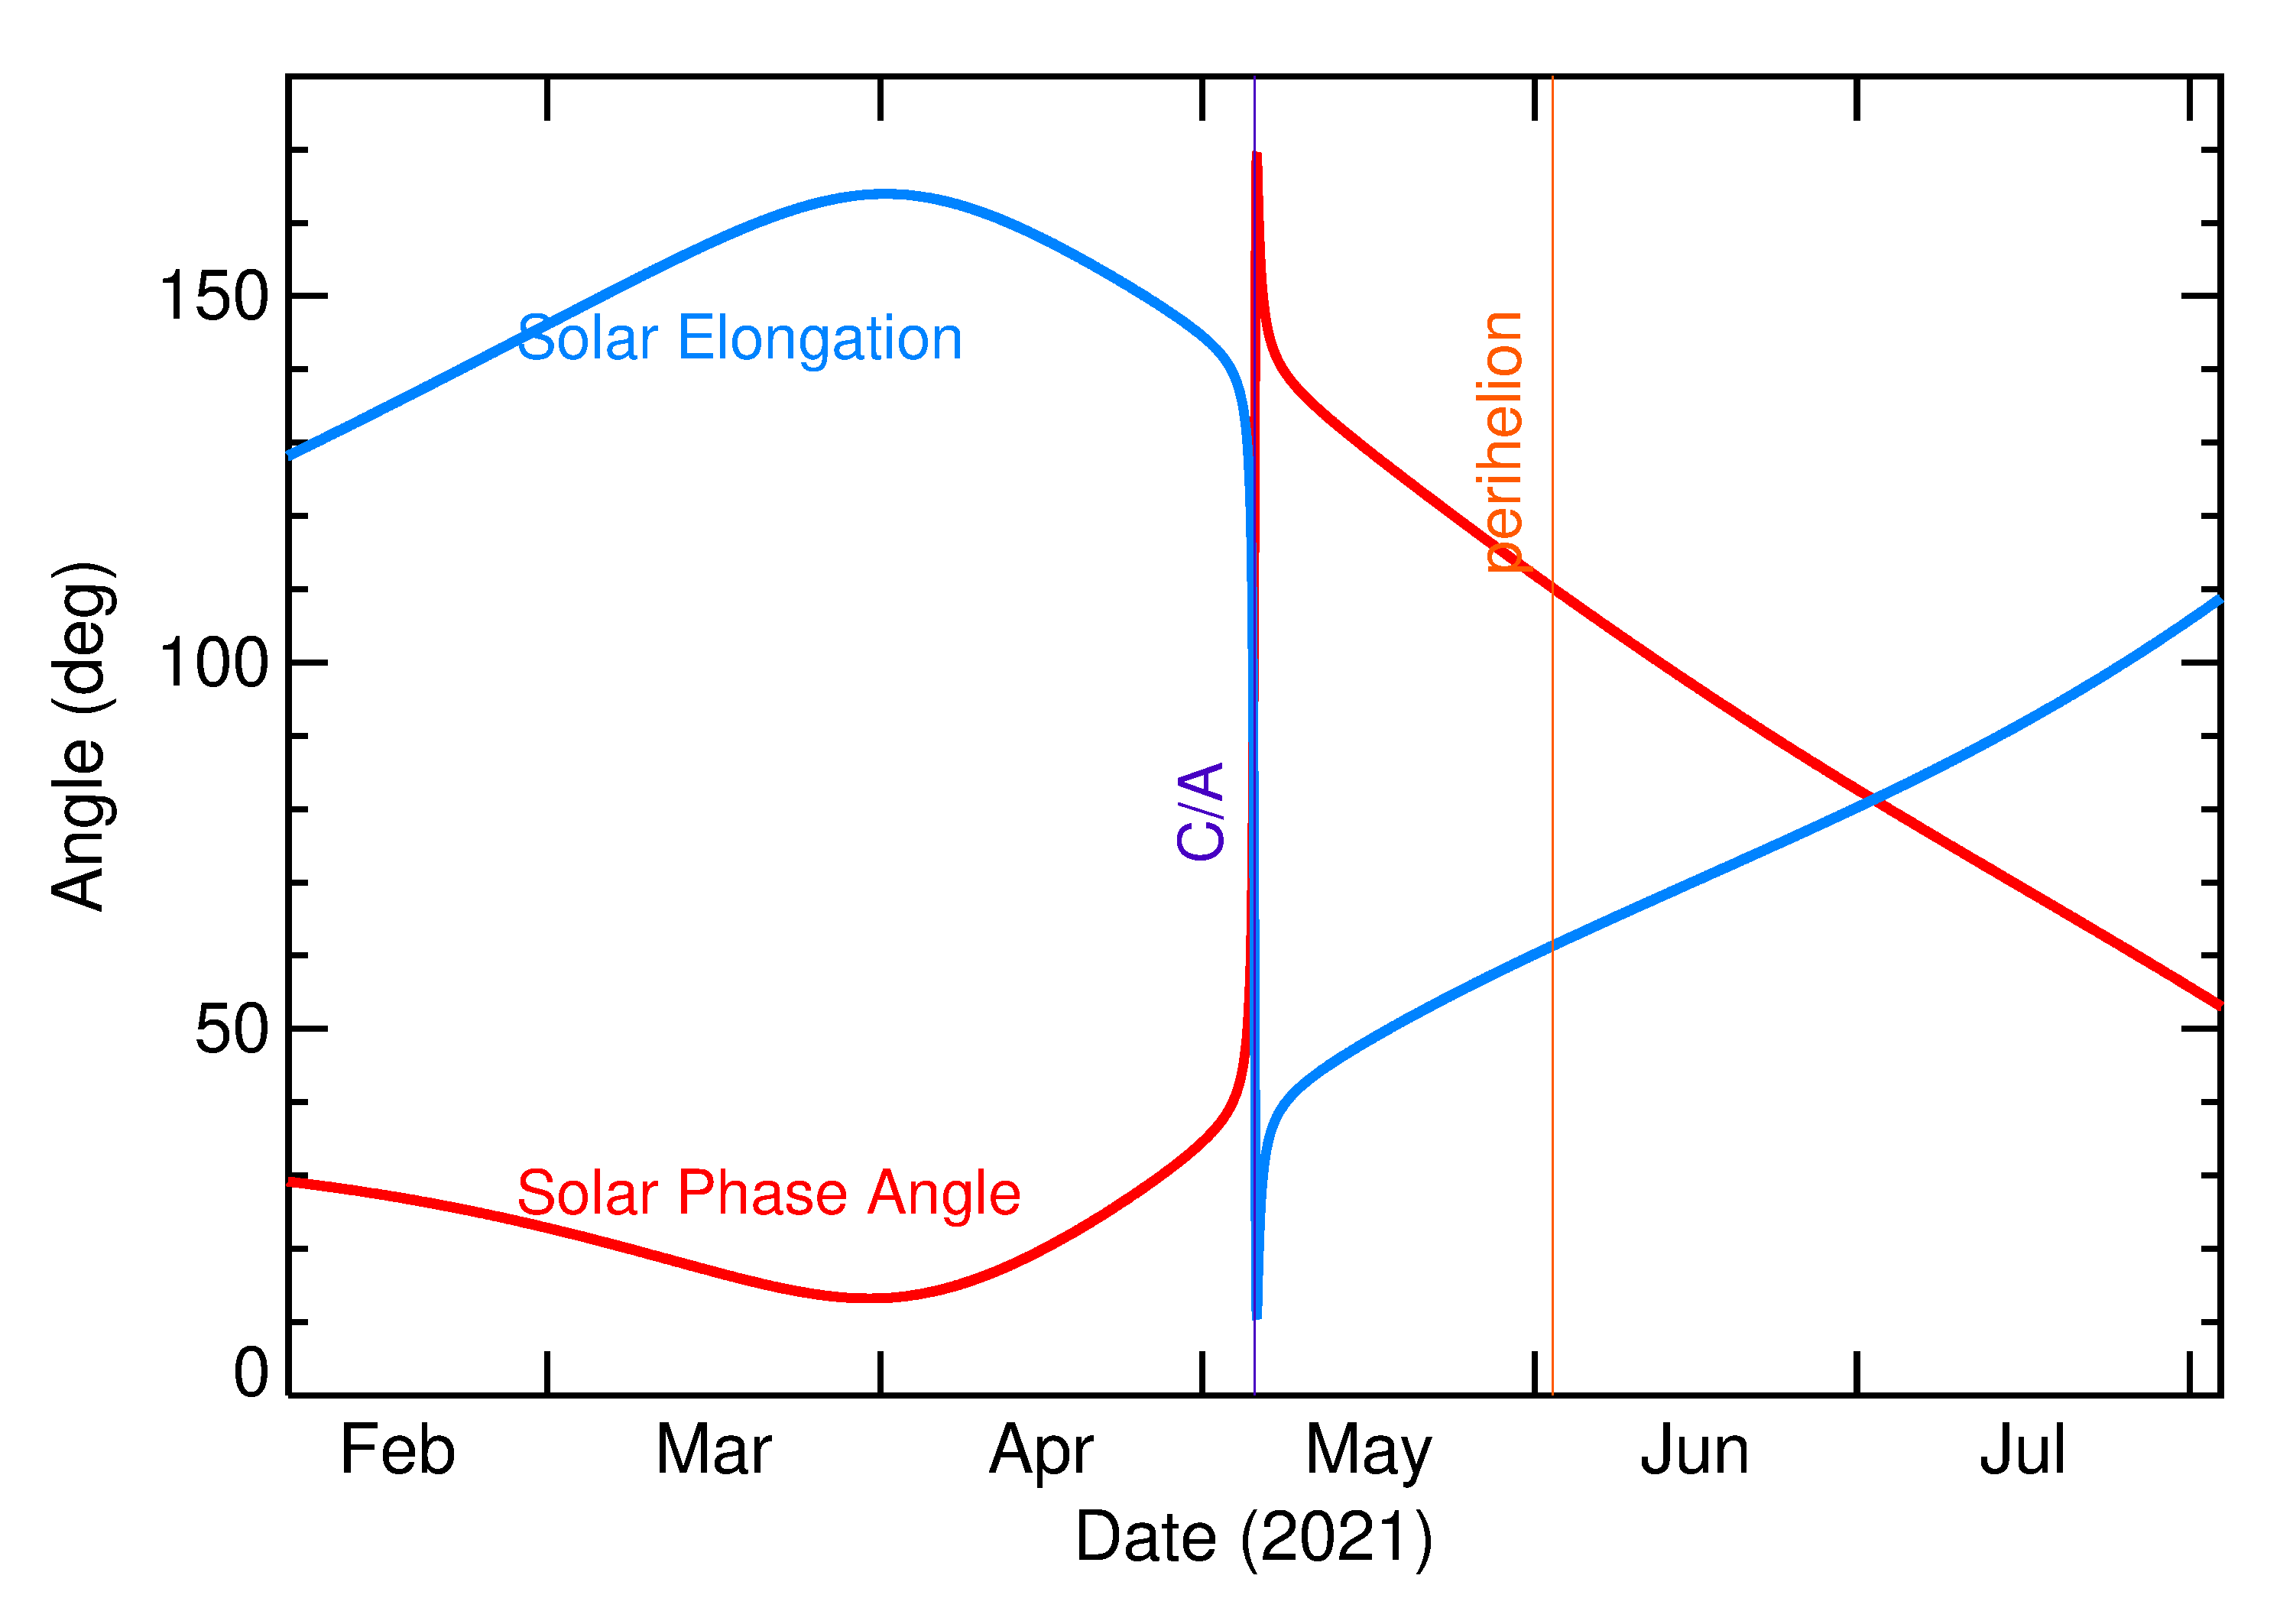 Solar Elongation and Solar Phase Angle of 2021 JV in the months around closest approach